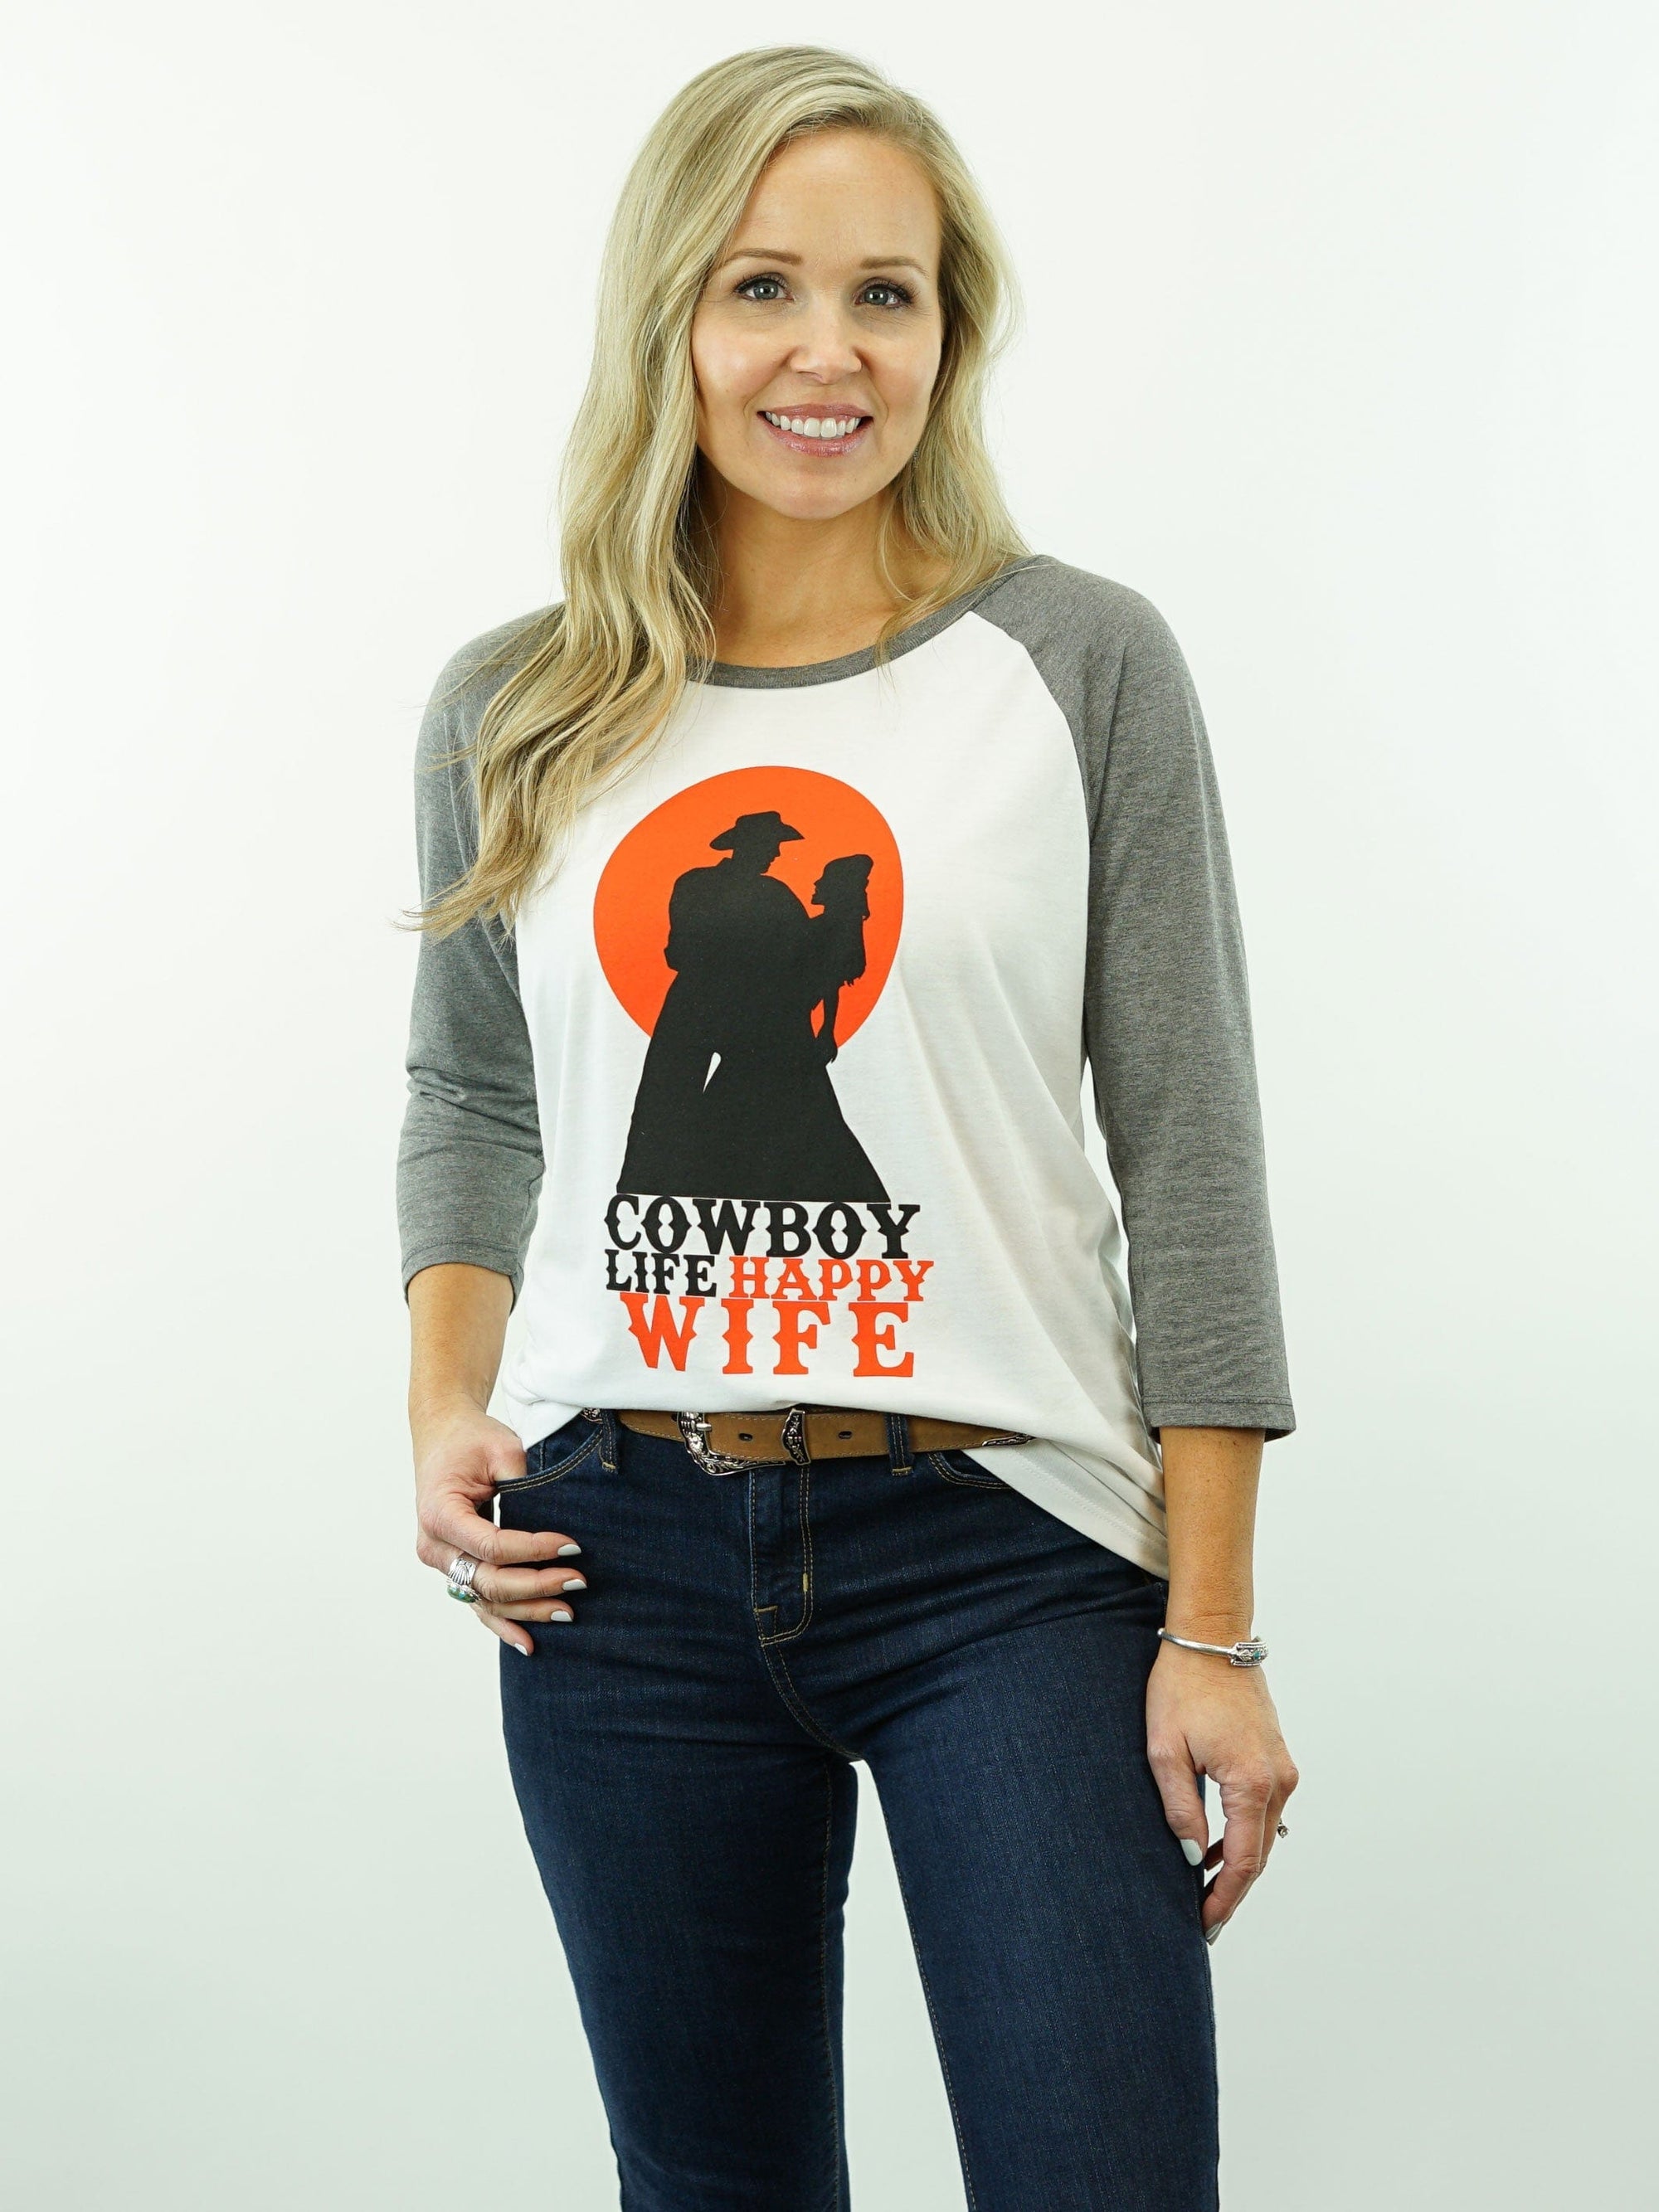 Drover Cowboy Threads Shirts T-Shirt - Cowboy Life Happy Wife - Two Color, 3/4 Sleeve, Women's Cut